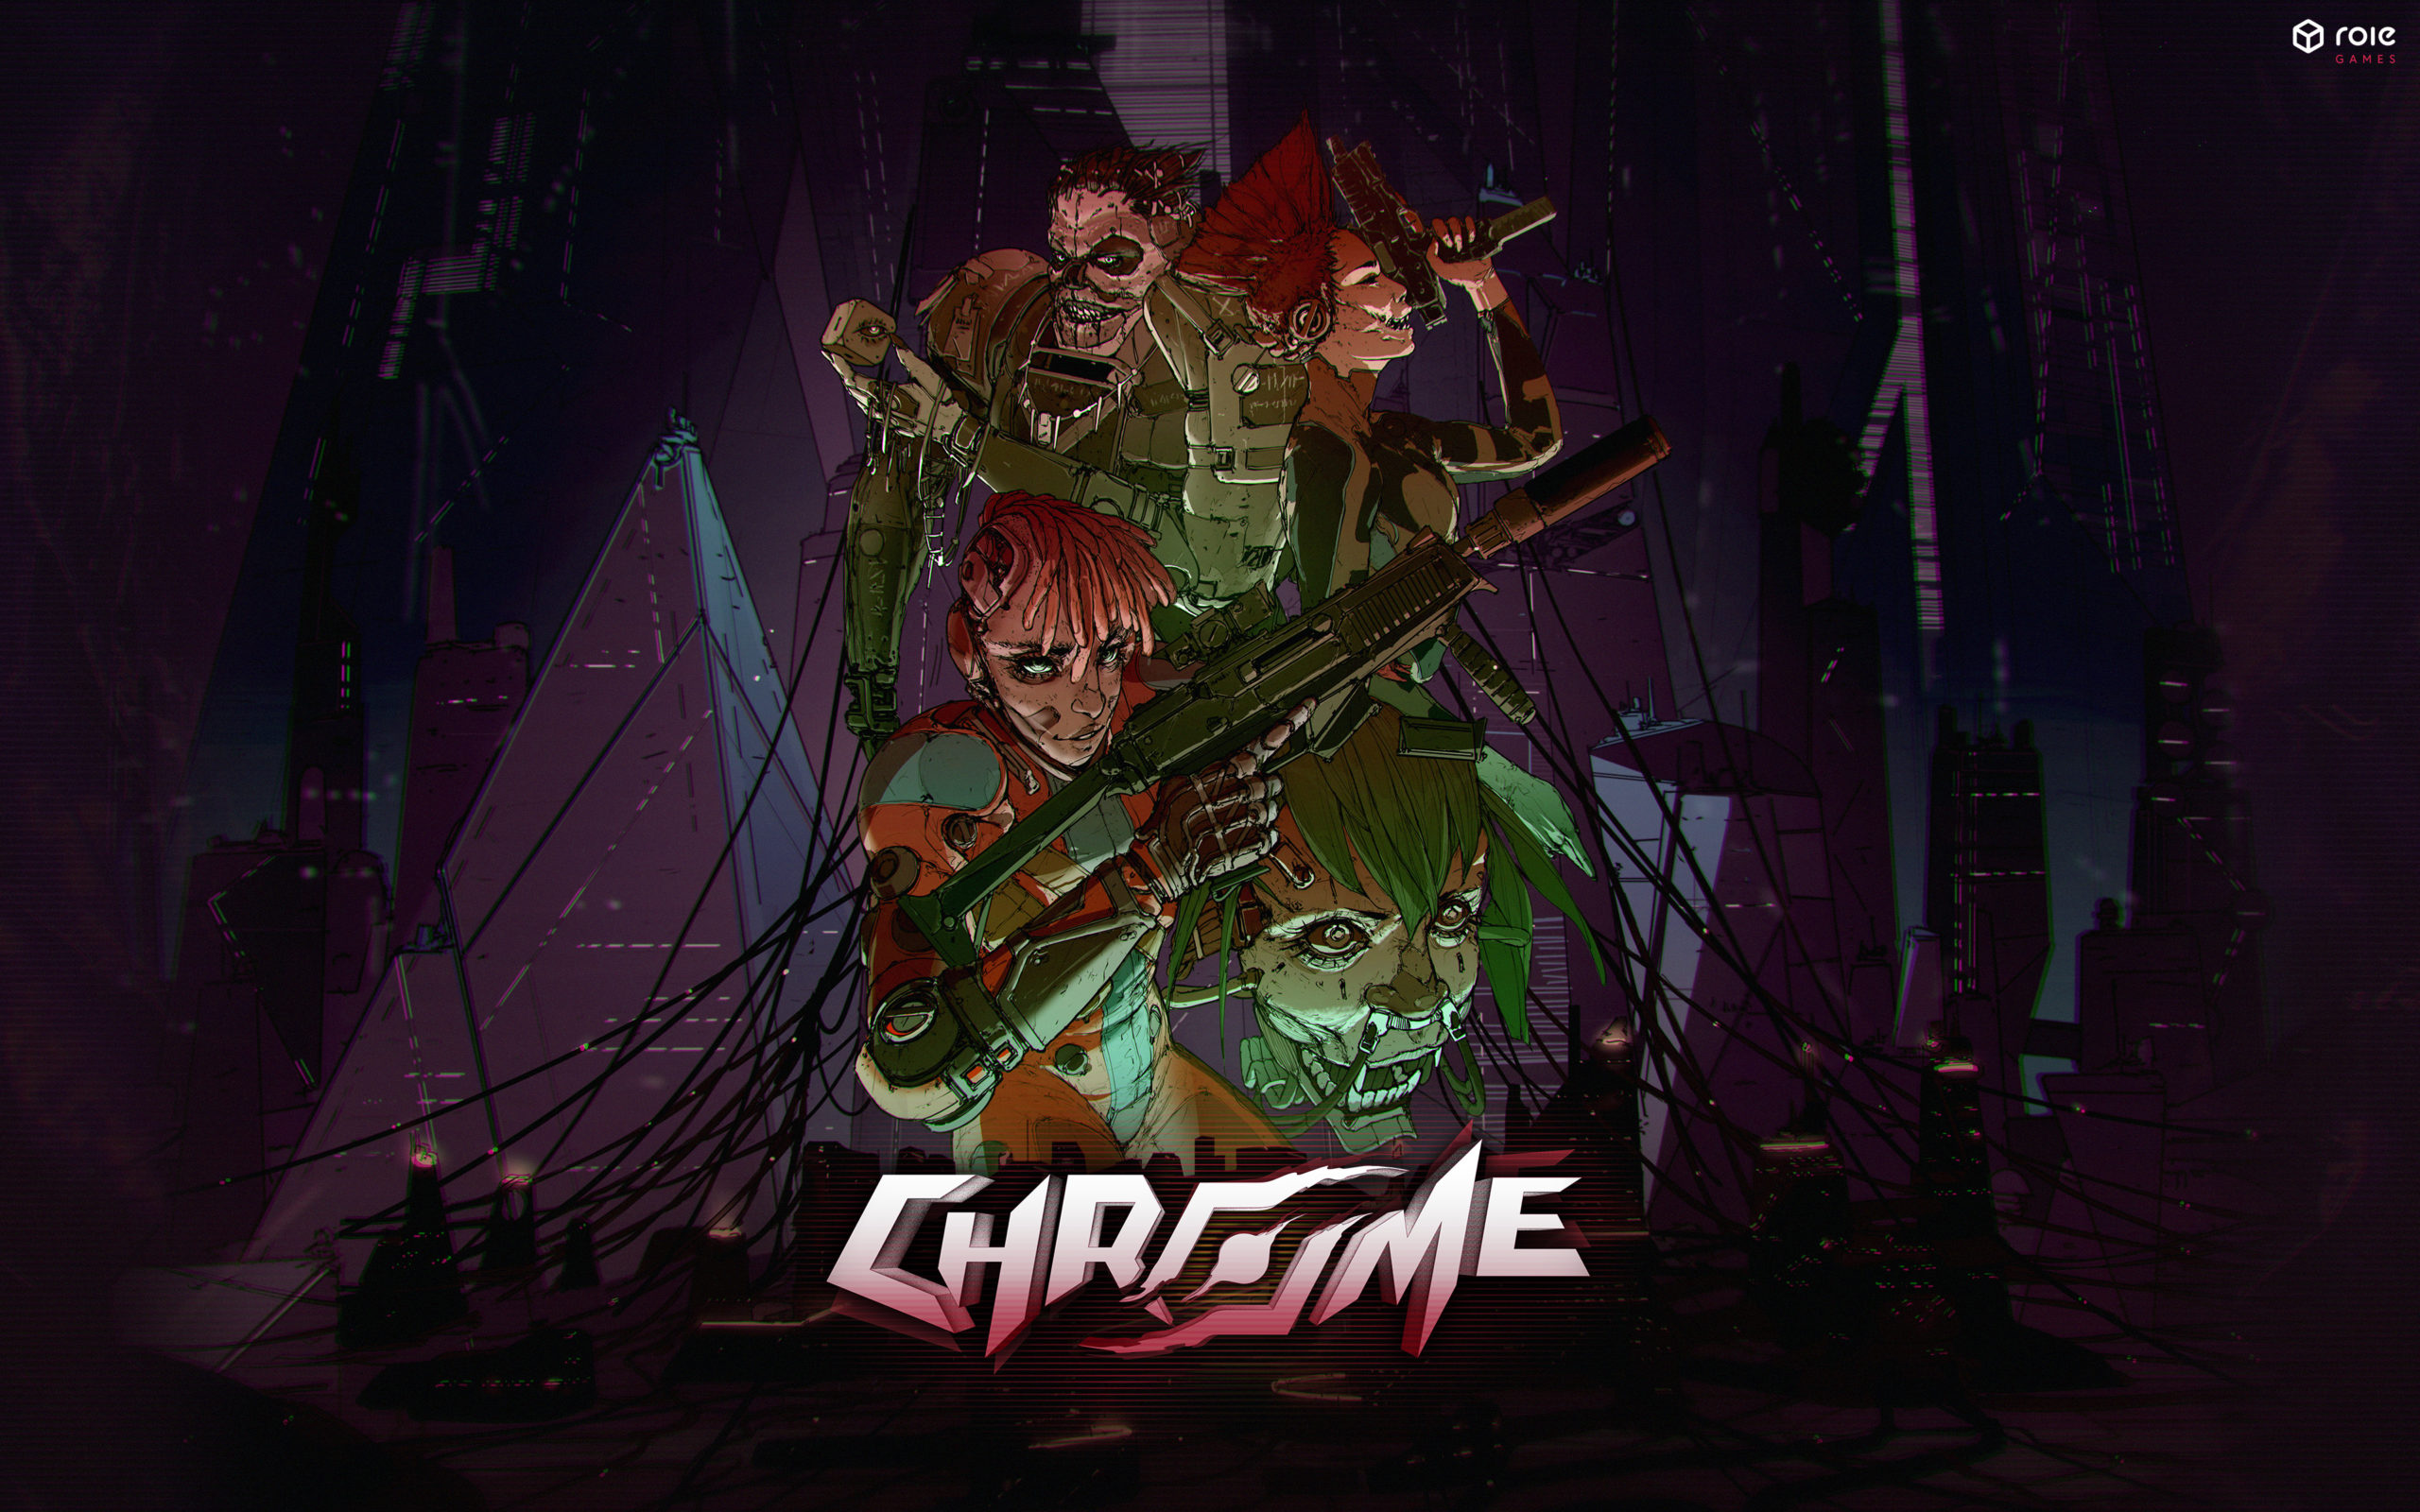 CHROME game cover art featuring 4 cybertech augmented characters in a dramatic pose against a dark city backdrop. CHROME logo large at the bottom.